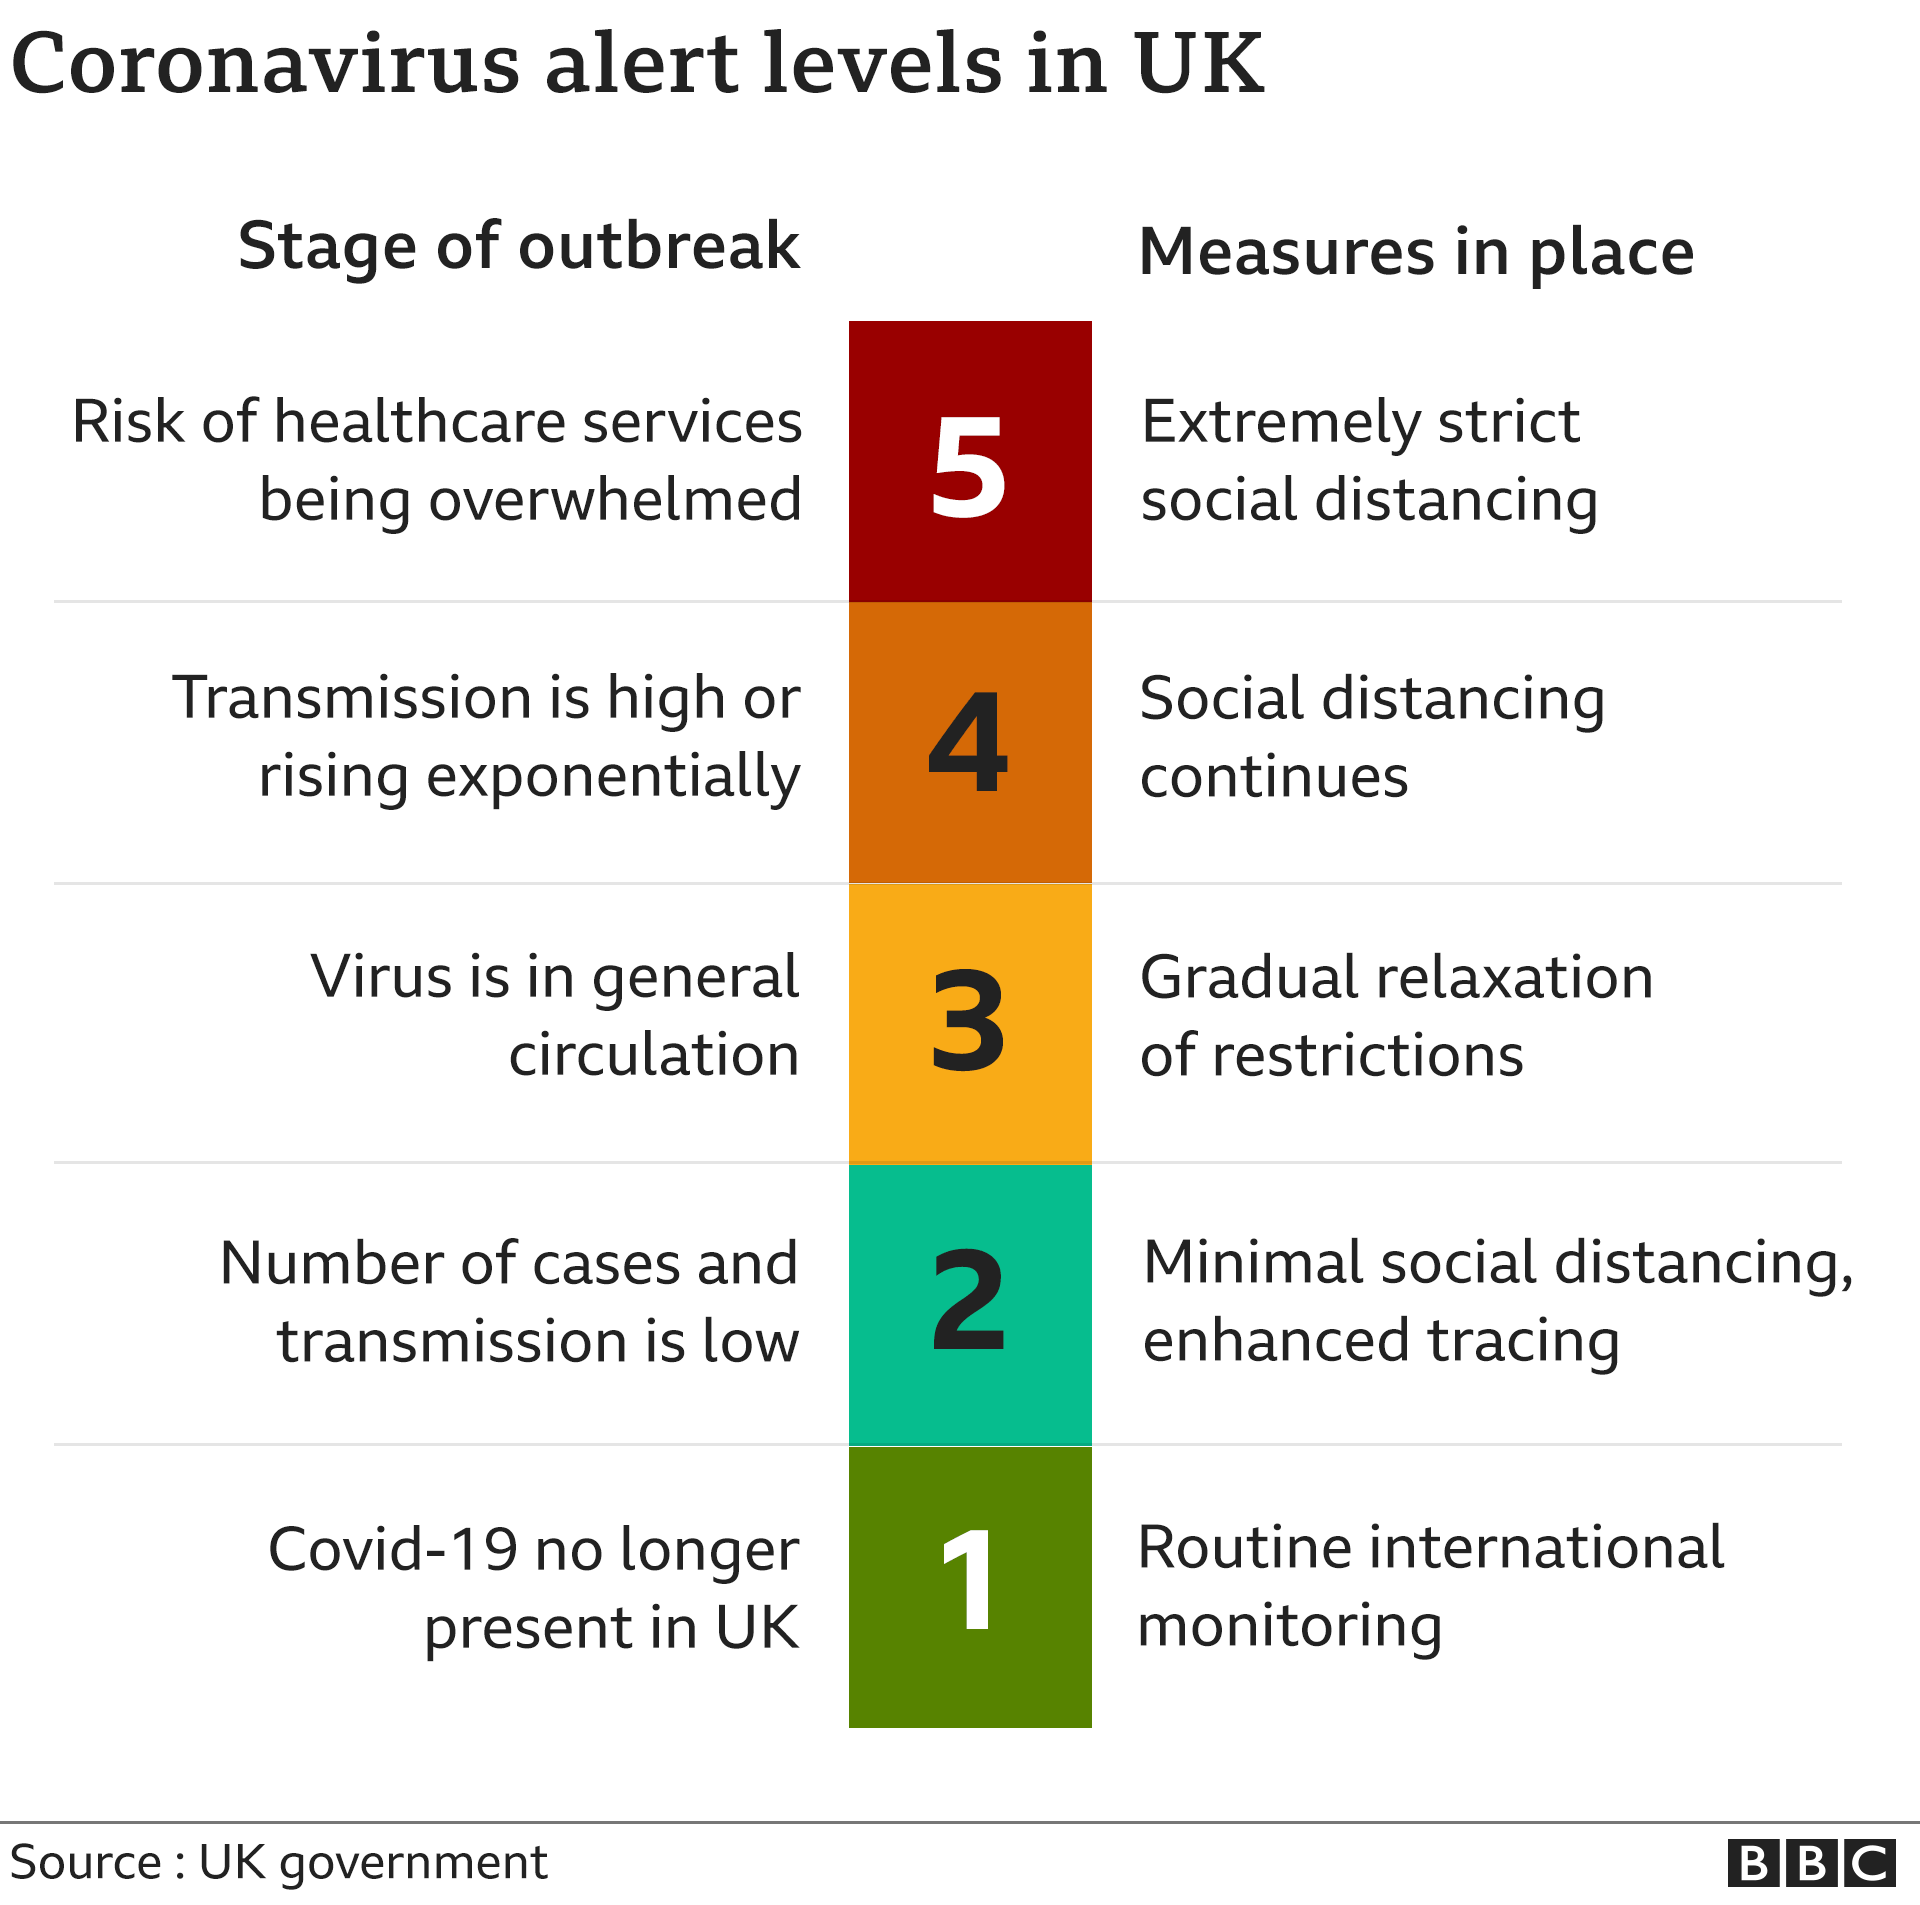 Graphic showing coronavirus alert levels from 5-1 where 5 is risk of overwhelming healthcare services, 4 is transmission high, 3 is virus in general circulation, 2 is number of cases and transmission low, 1 virus no longer present in UK